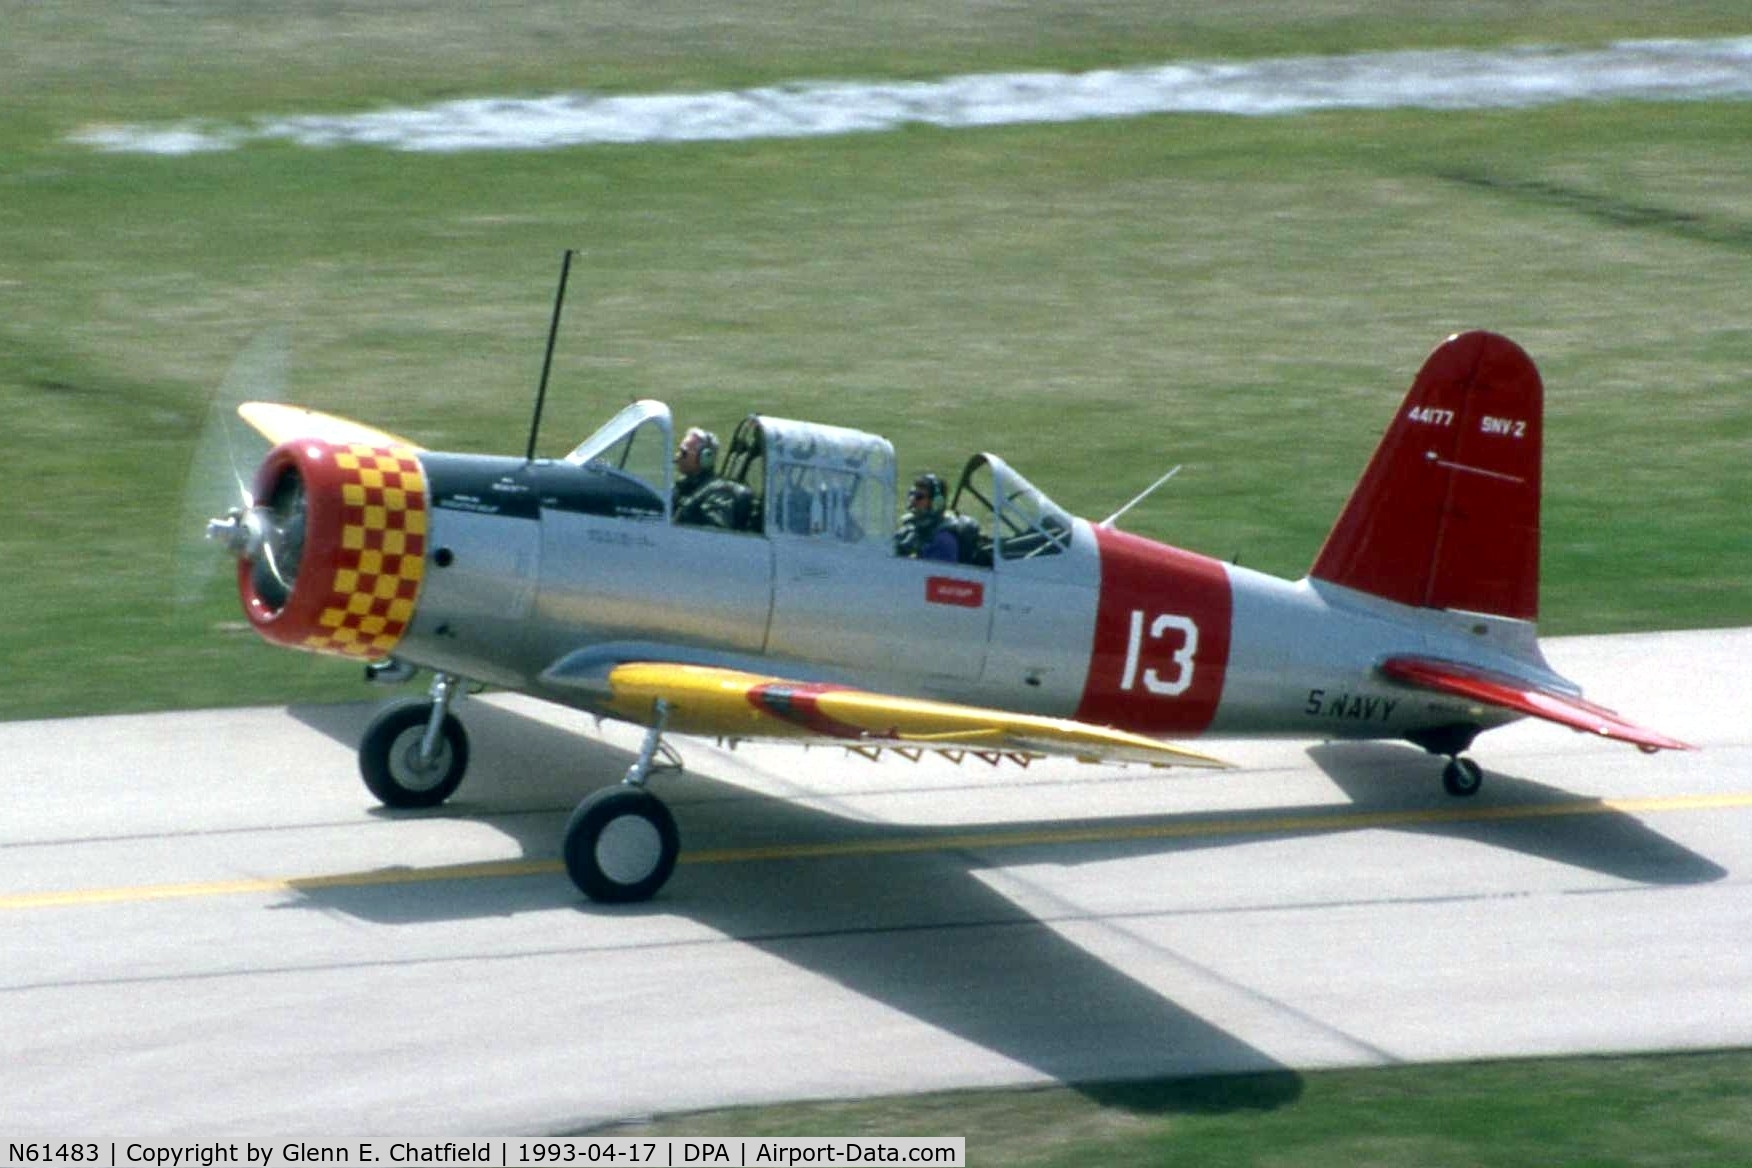 N61483, 1943 Consolidated Vultee SNV-2 C/N 79-1420, SNV-2, ex BT-13 44-32150, taxiing past the control tower